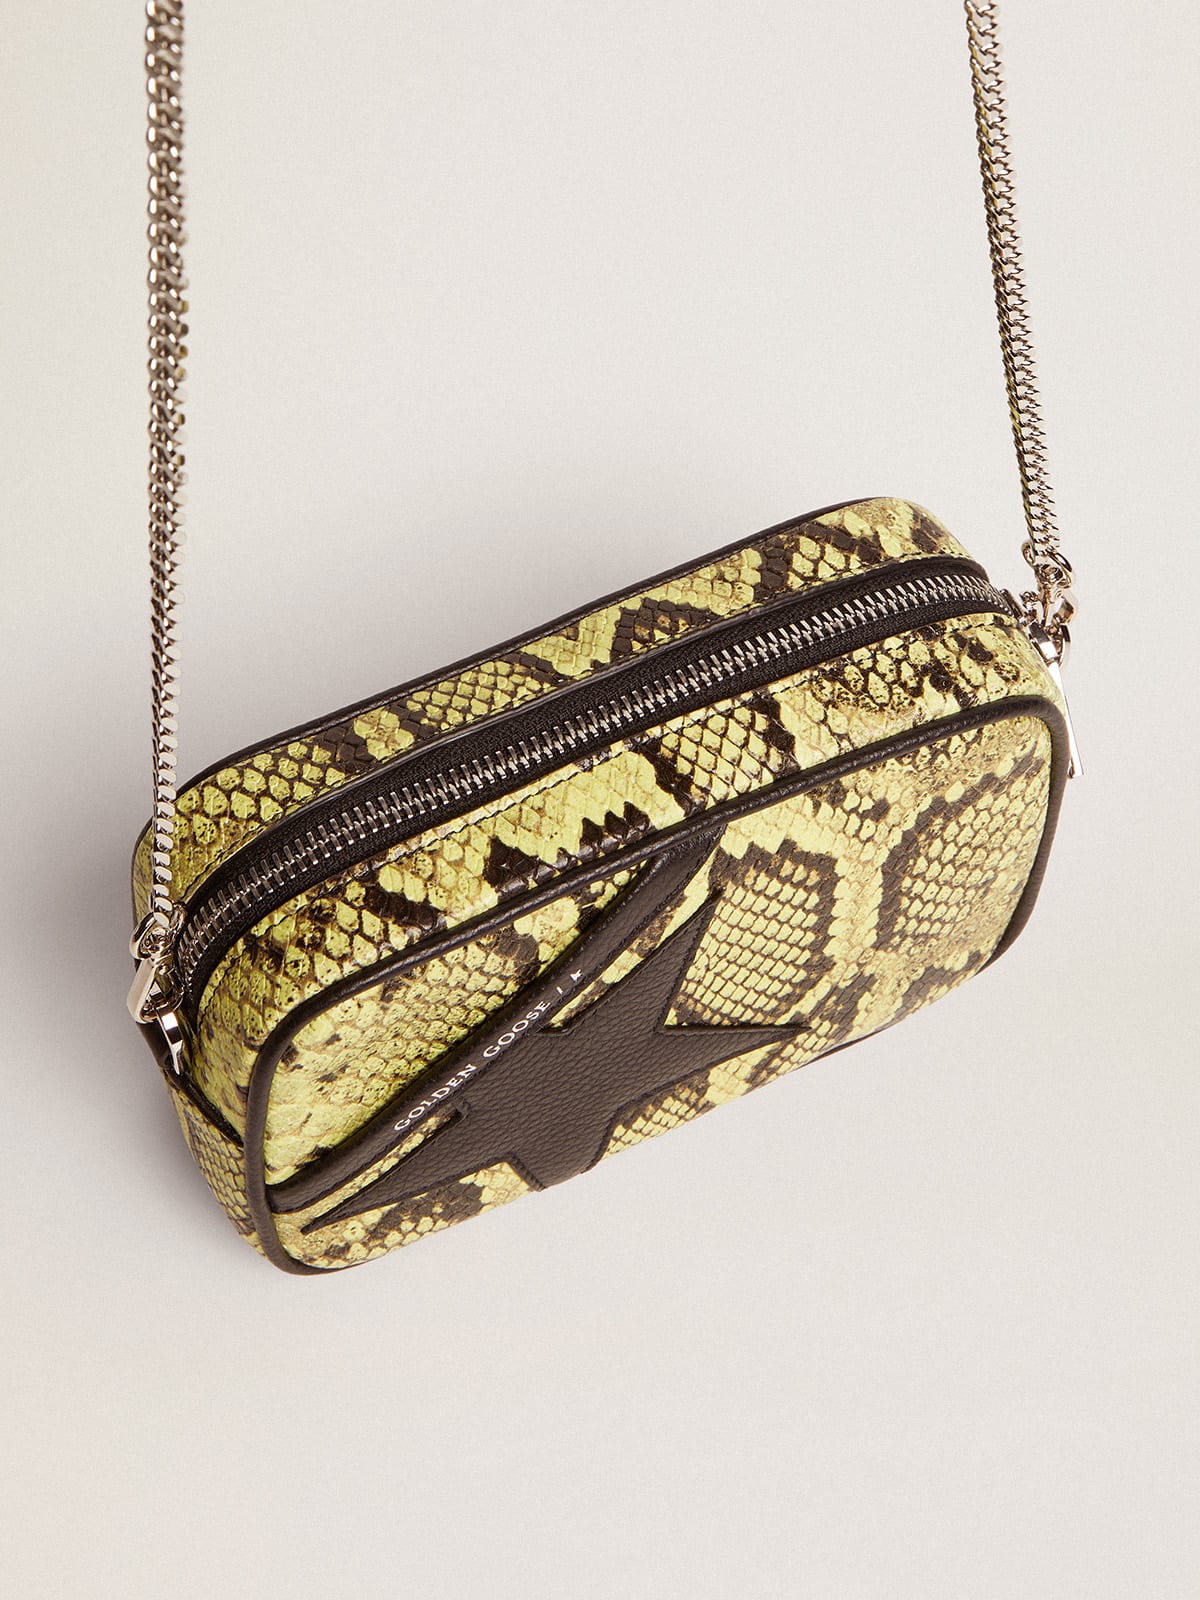 Golden Goose - Women's Mini Star Bag in lime green snake print leather with black star in 